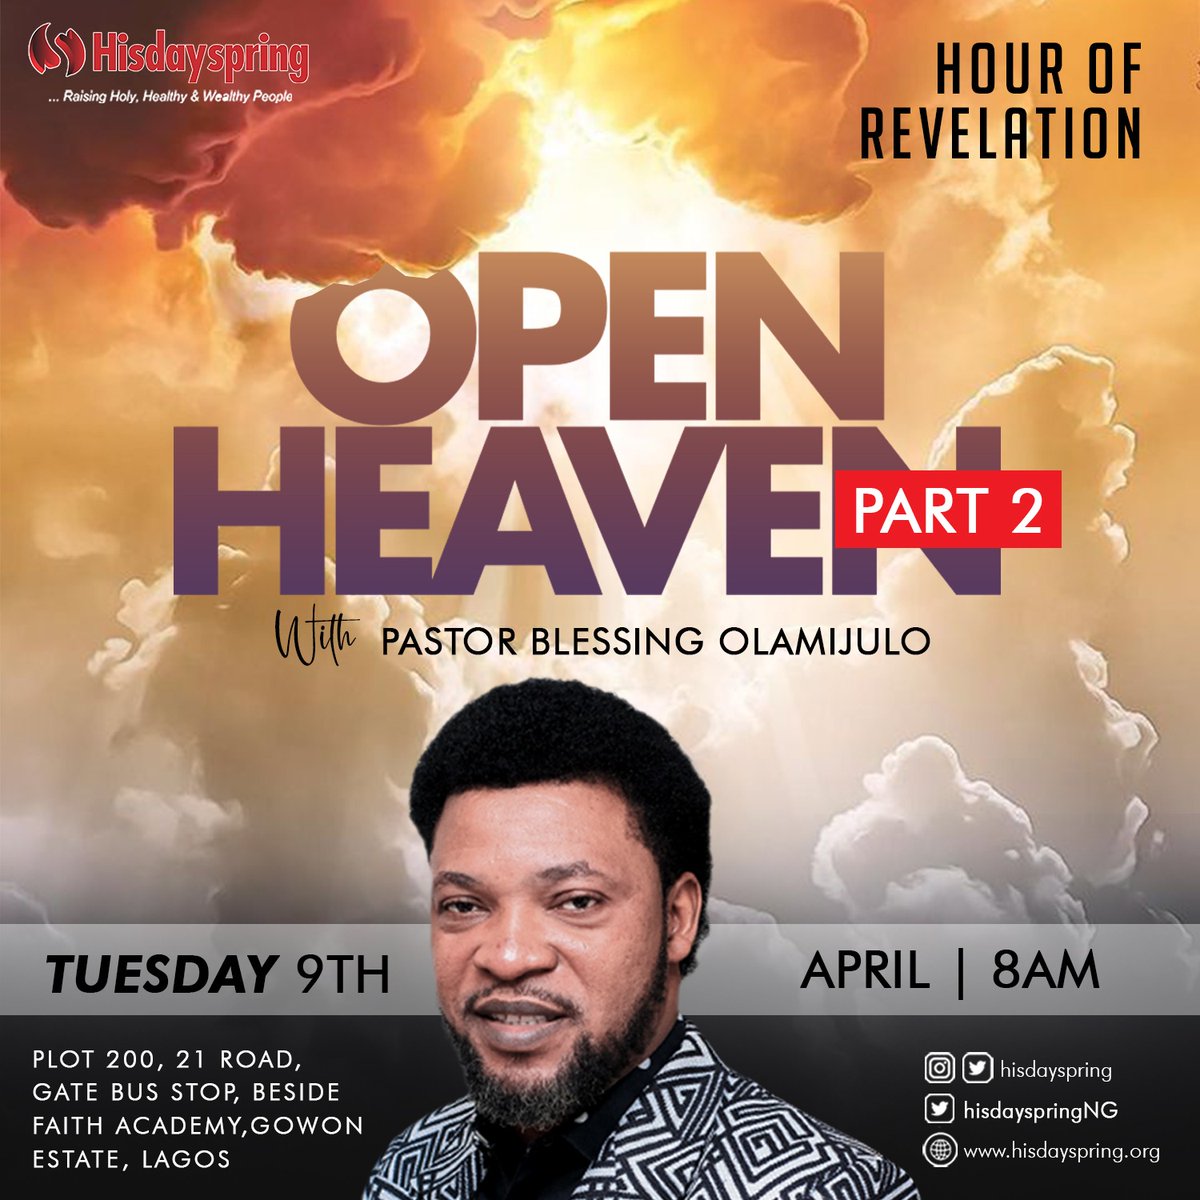 OPEN HEAVEN✝️ continues tomorrow at our Hour Of Revelation Service. Take advantage of Tuesday's public holiday, and come witness the move of the Holy Spirit through healings, and breakthroughs Join us from 8am at Plot 200, 21 Road, Gowon Estate, Gate Bus Stop, Ipaja Lagos.